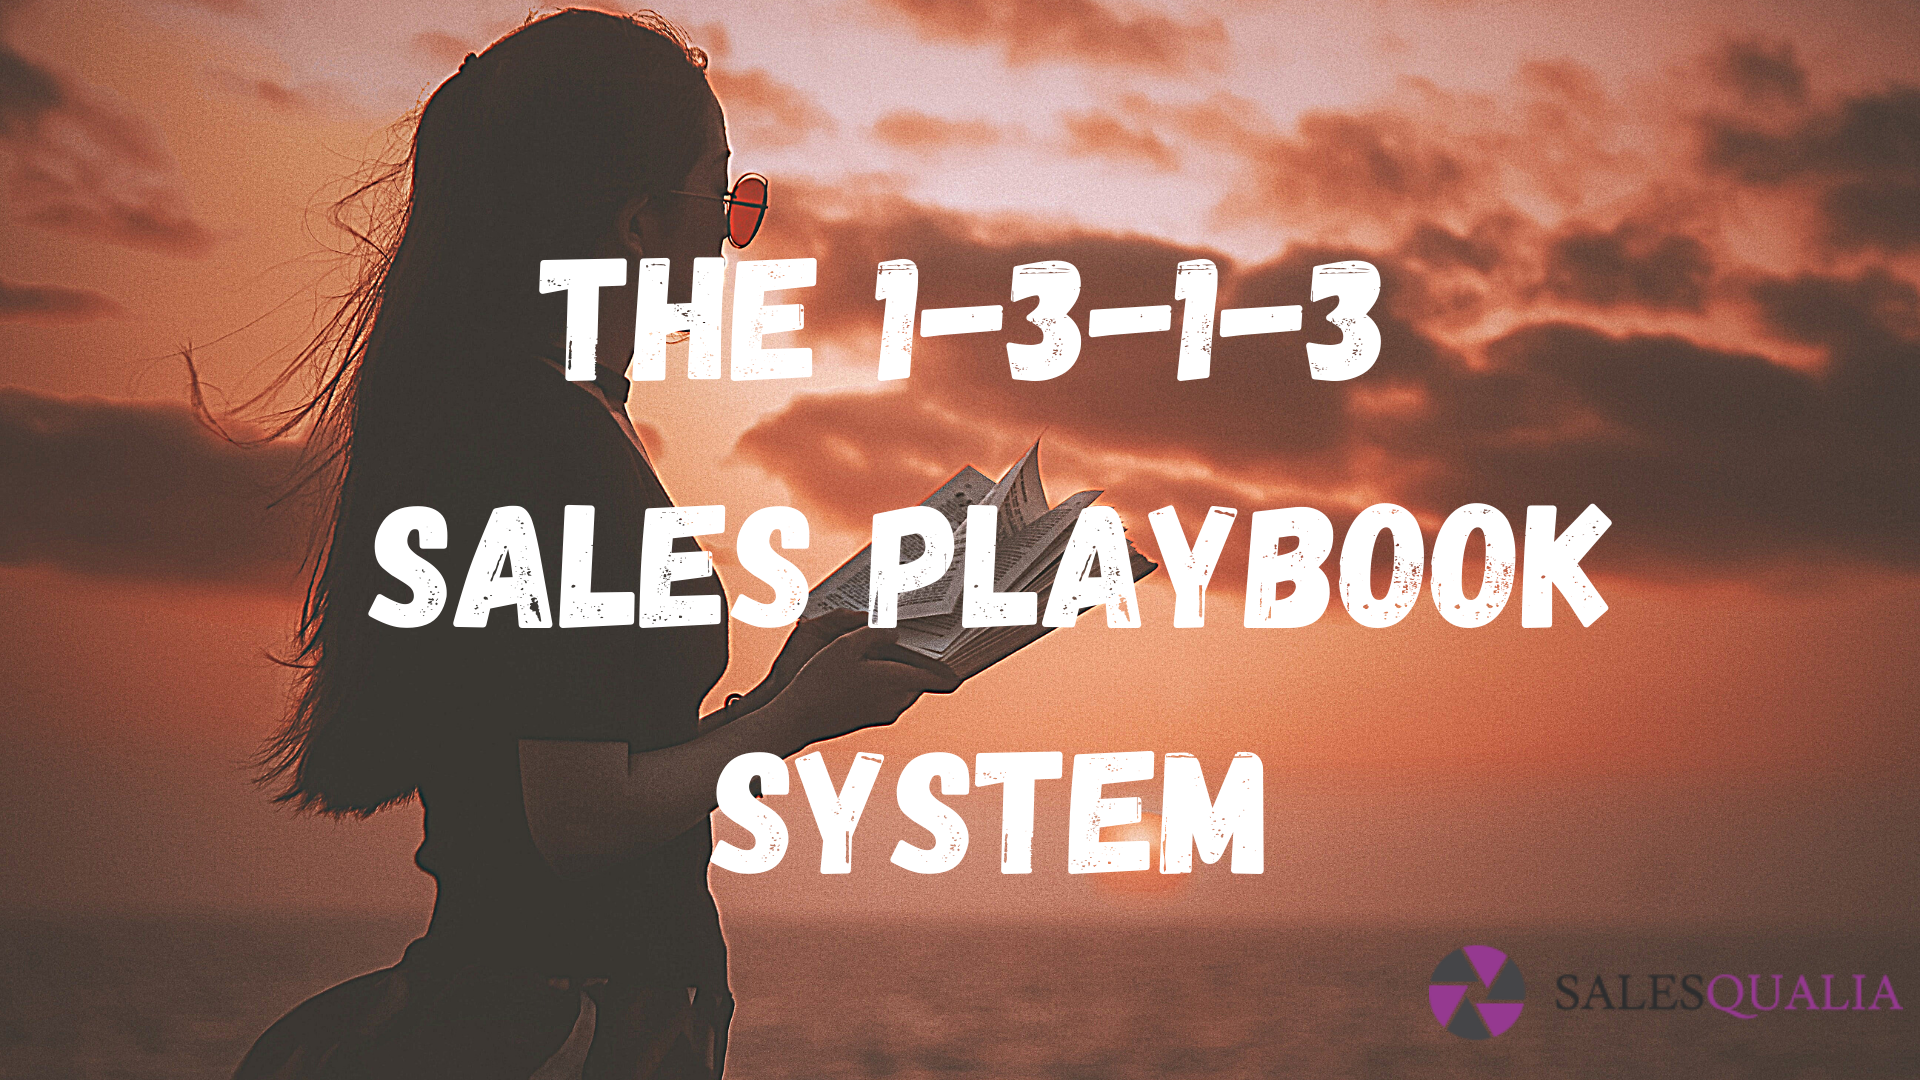 The 1-3-1-3 Sales Playbook System